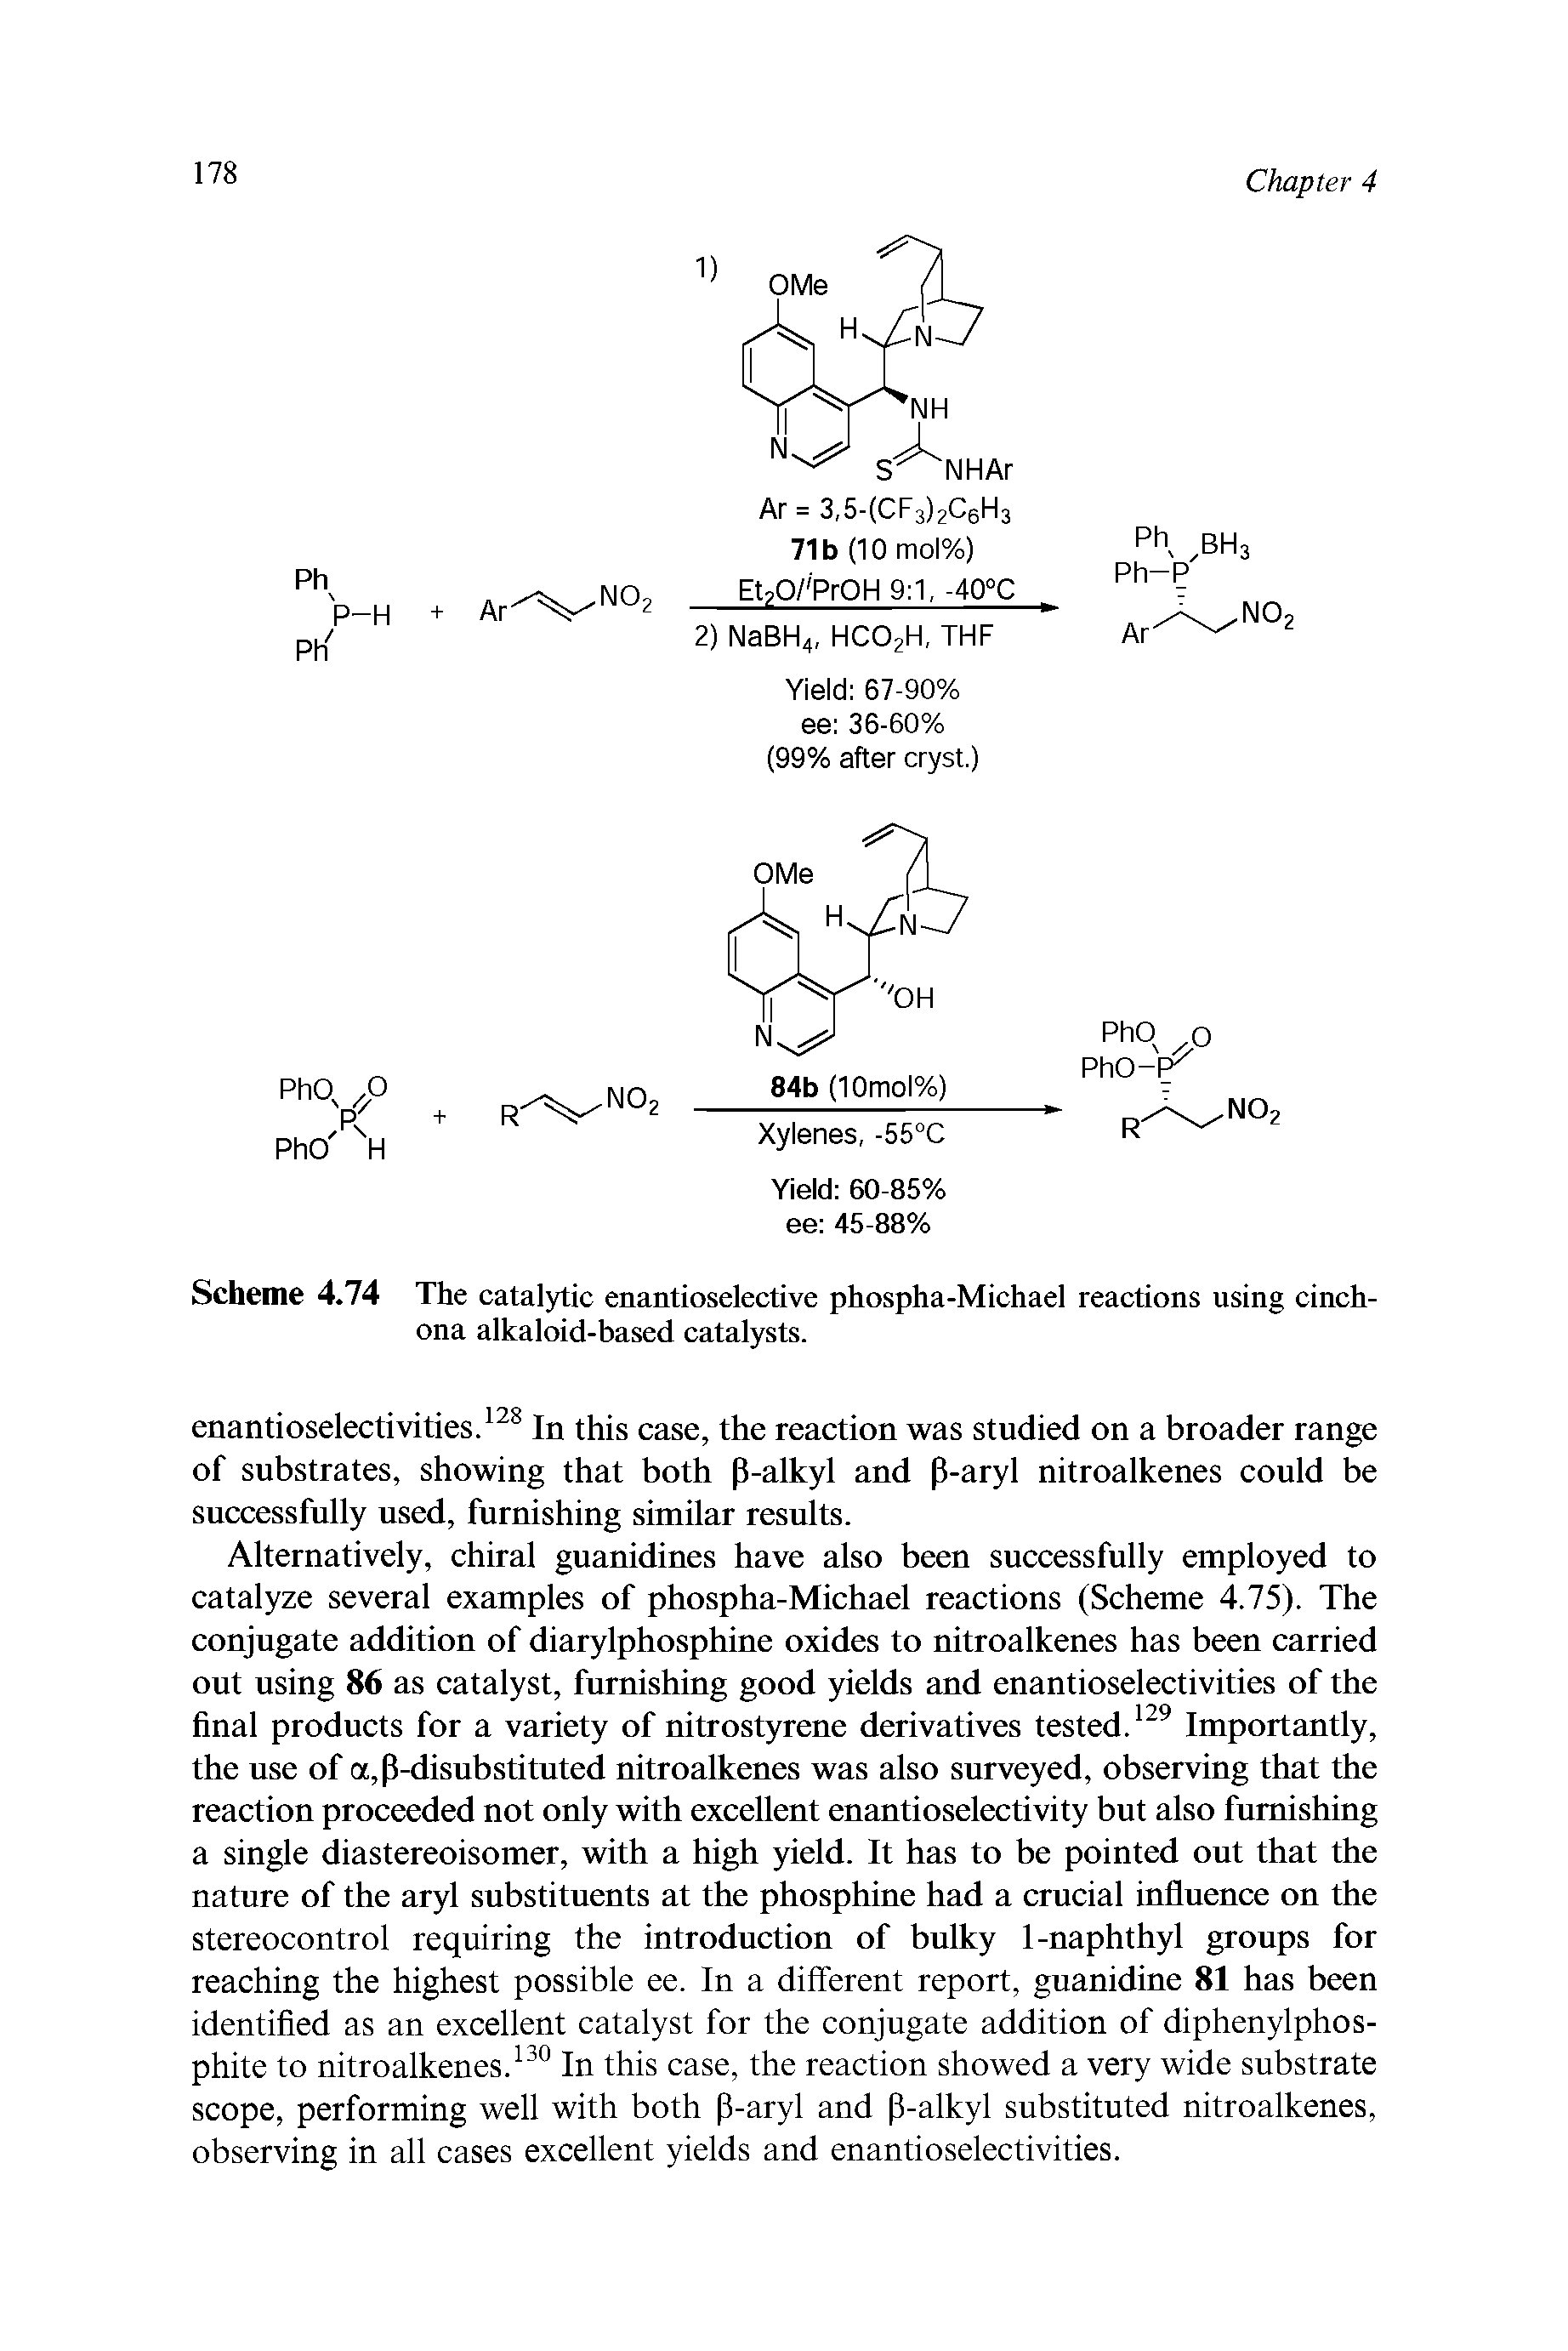 Scheme 4.74 The catalytic enantioselective phospha-Michael reactions using cinchona alkaloid-based catalysts.